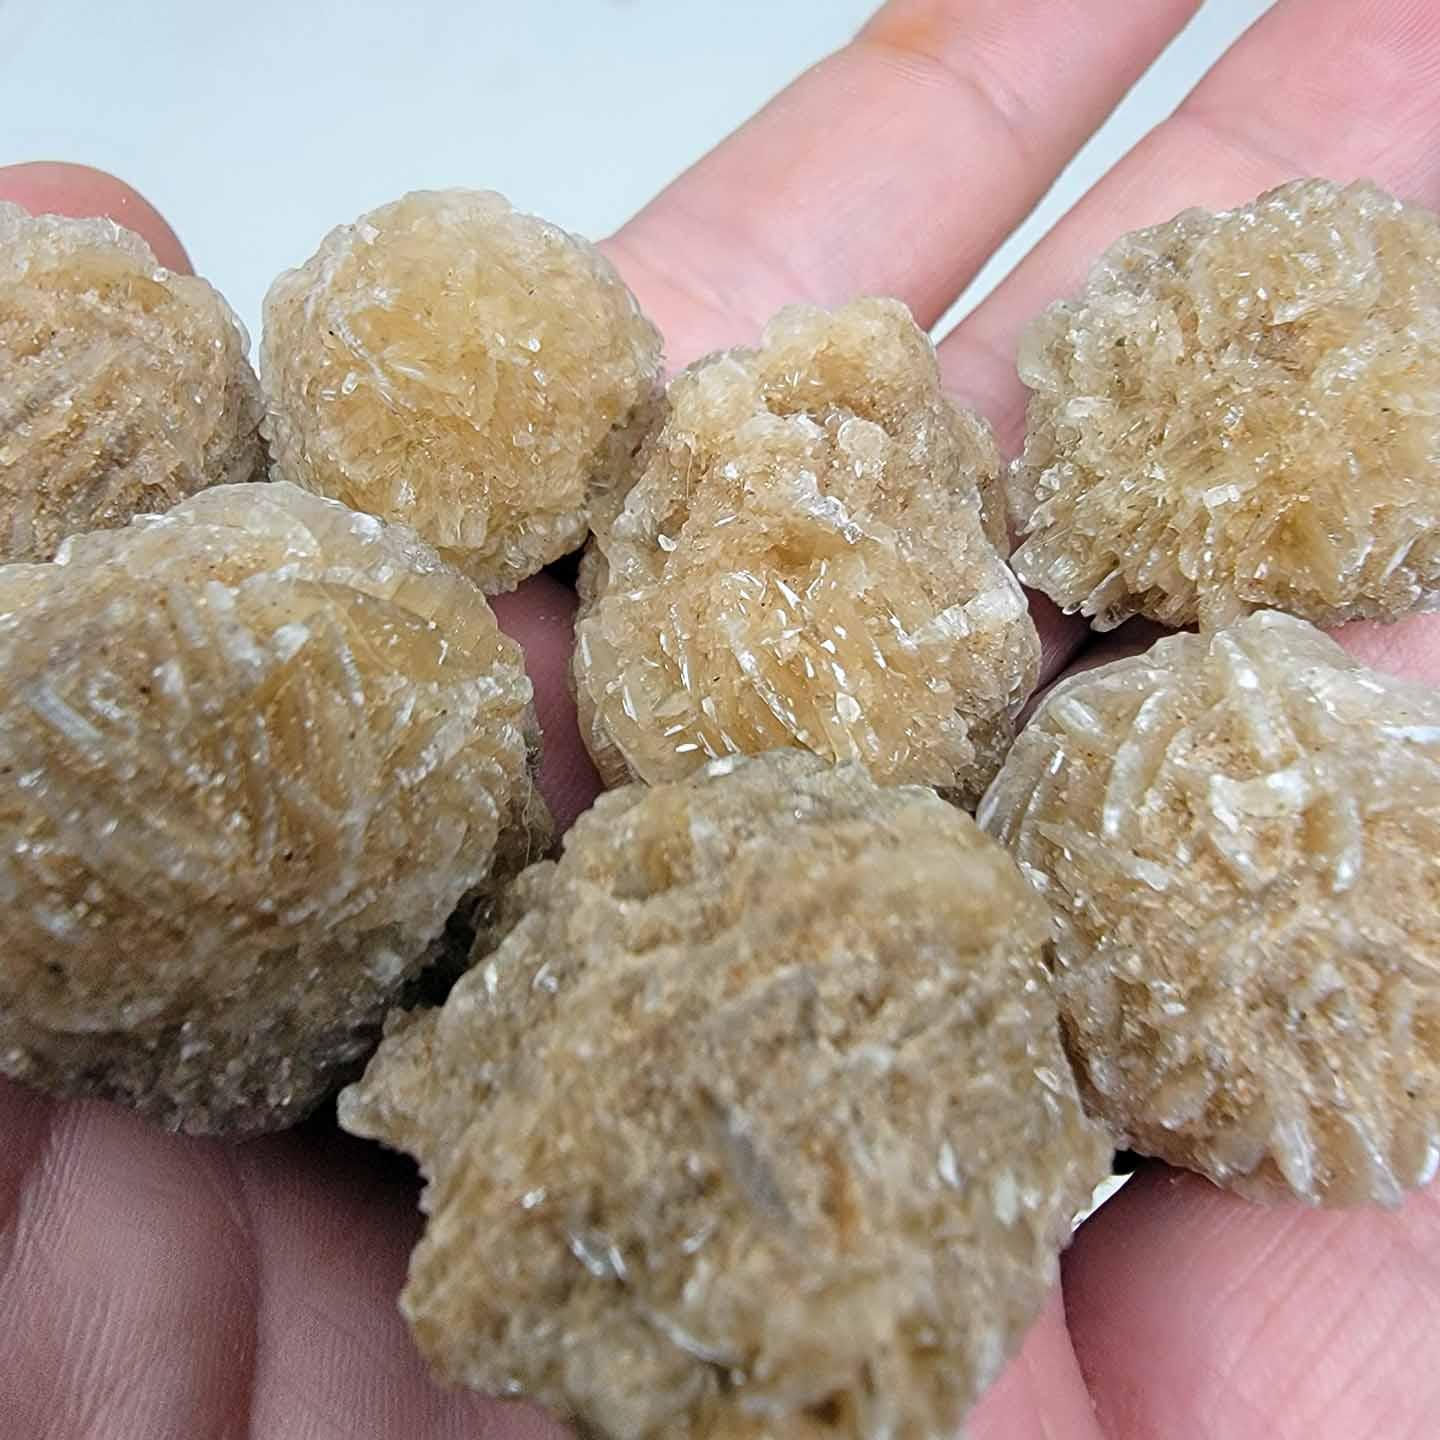 FIVE Mexican Desert Rose Selenite Crystal Formation! - LapidaryCentral